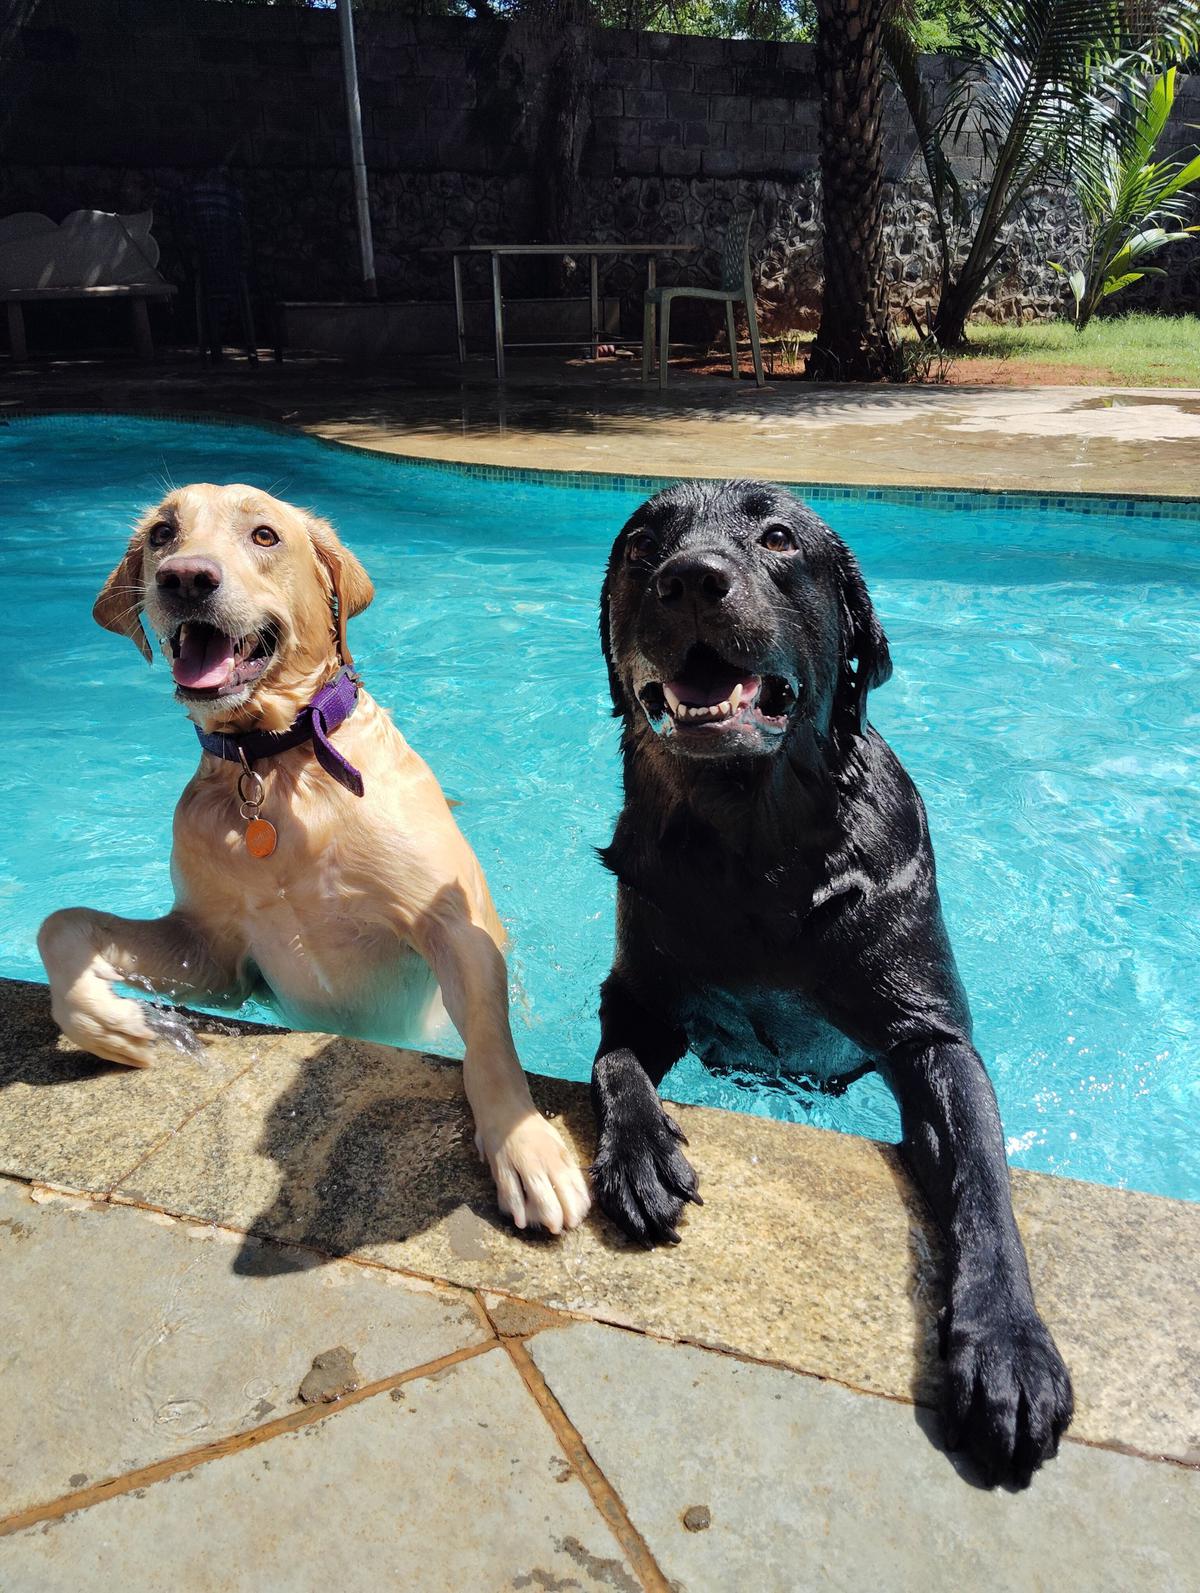 Pets cool off at the Top Dog swimming pool in Uthandi